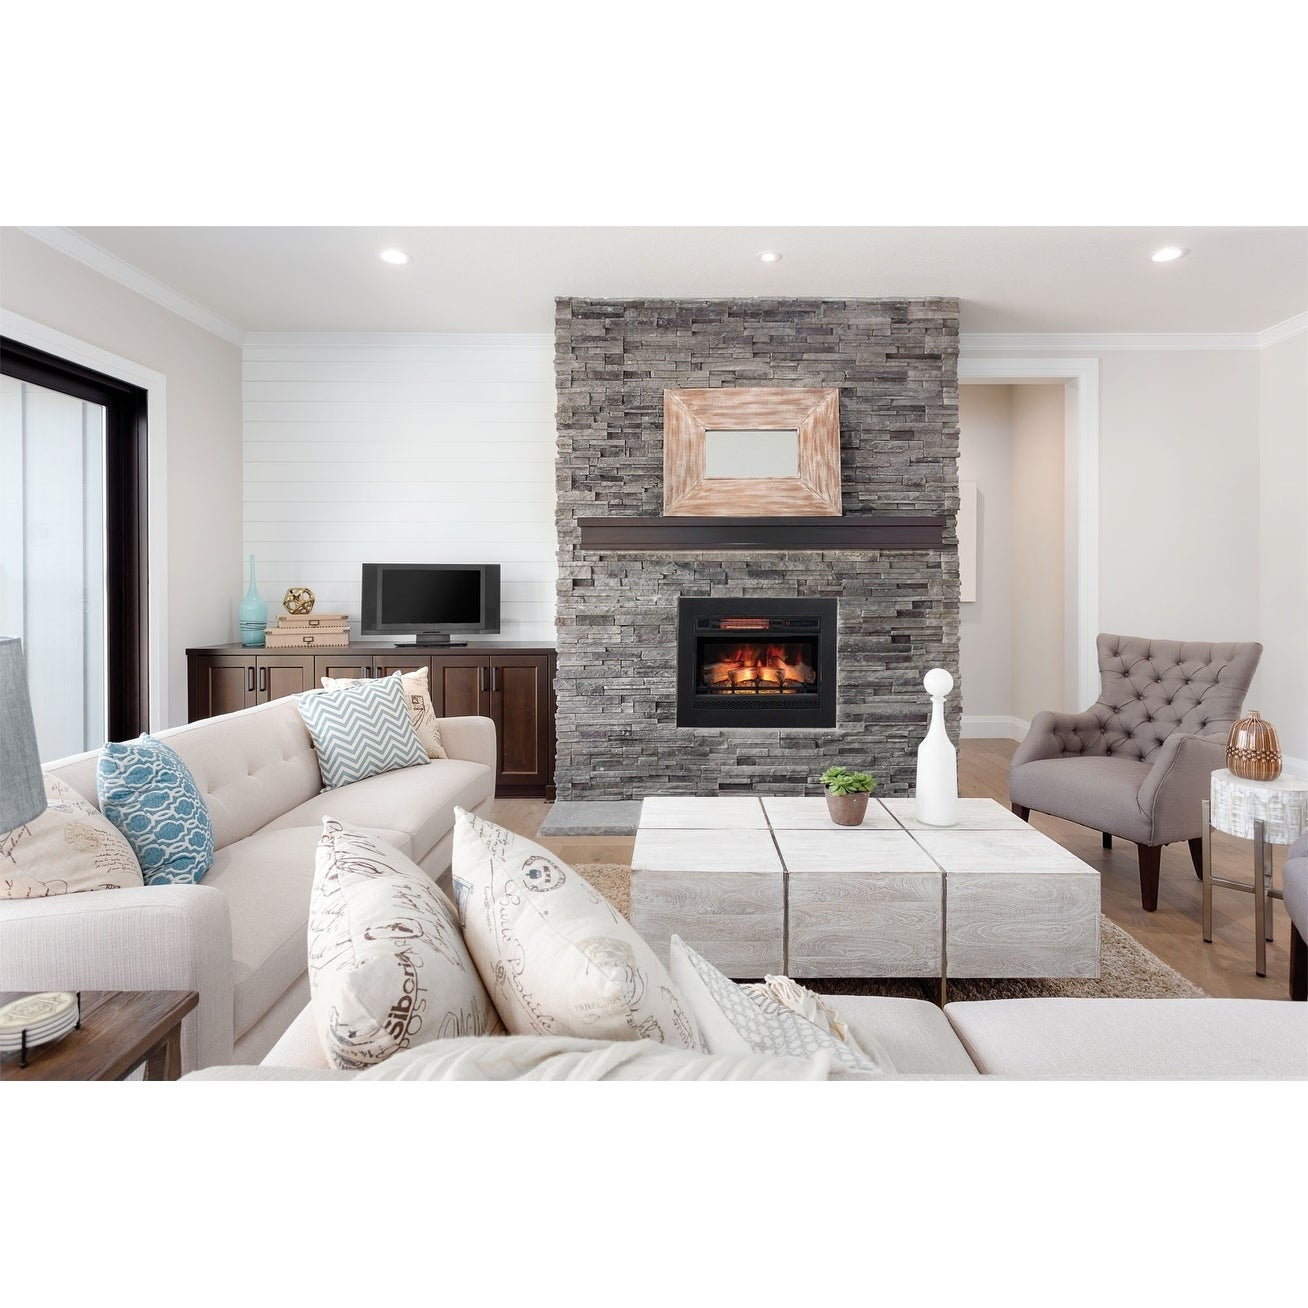 How to Put Out A Fireplace Fire Beautiful Classicflame 26" 3d Infrared Quartz Electric Fireplace Insert